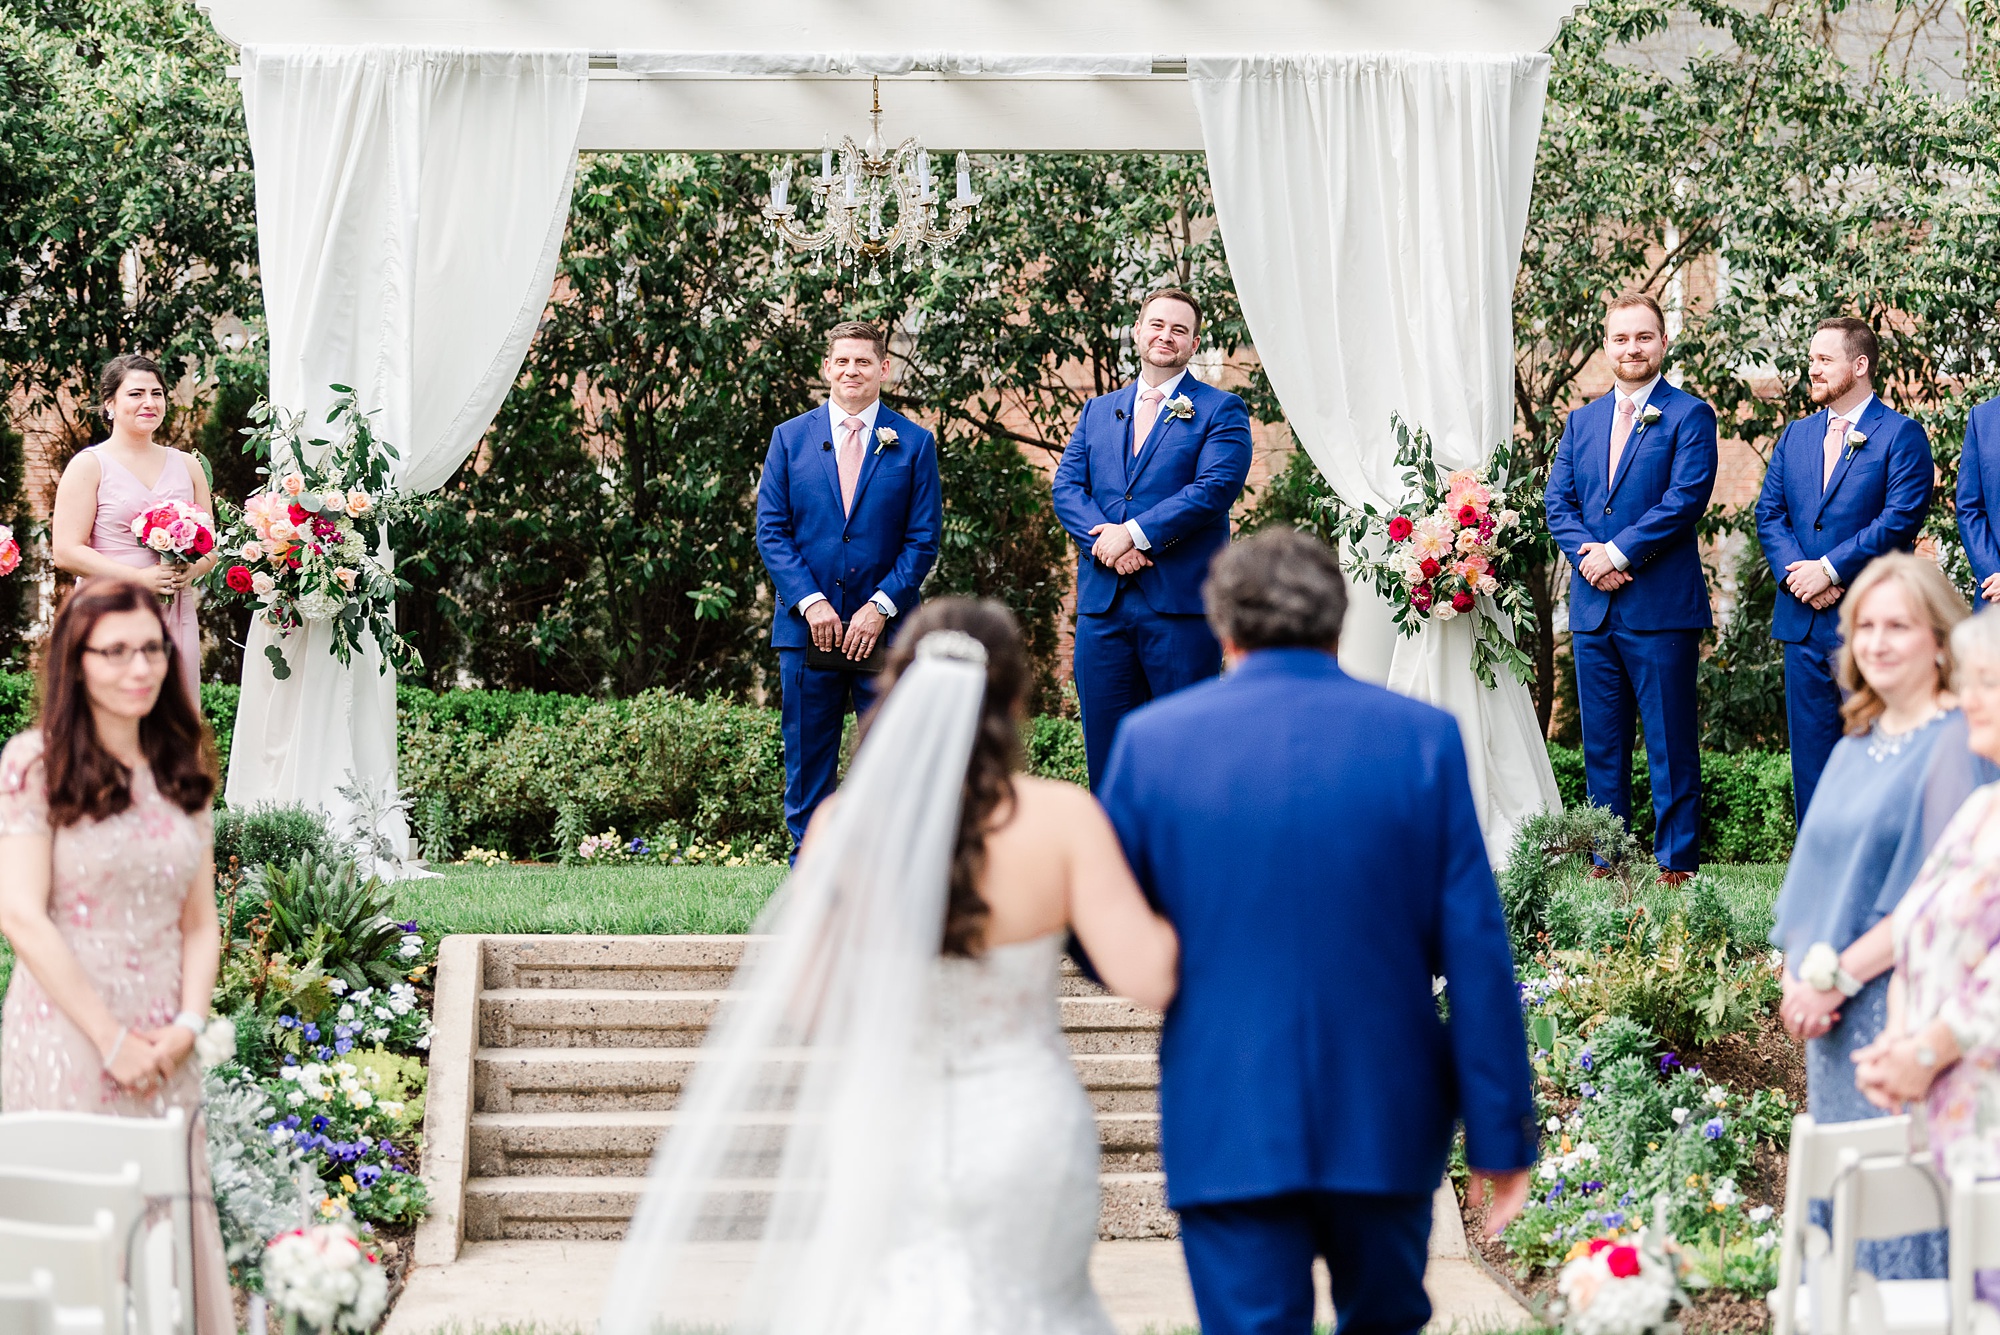 Classic Separk Mansion wedding photographed by Kevyn Dixon Photography